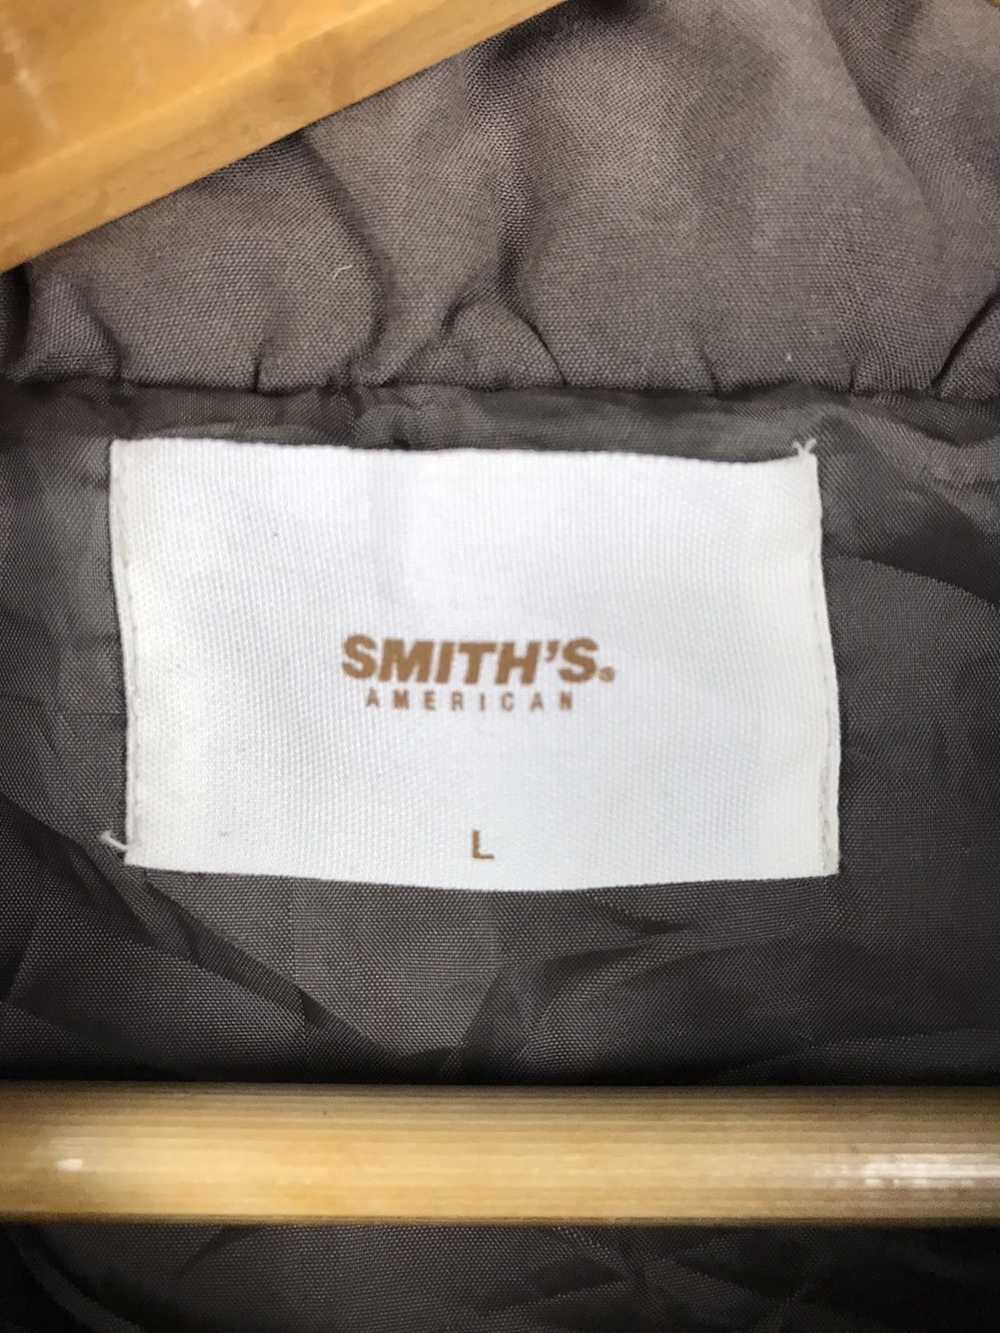 Streetwear × The Smiths × Vintage Smith's America… - image 5